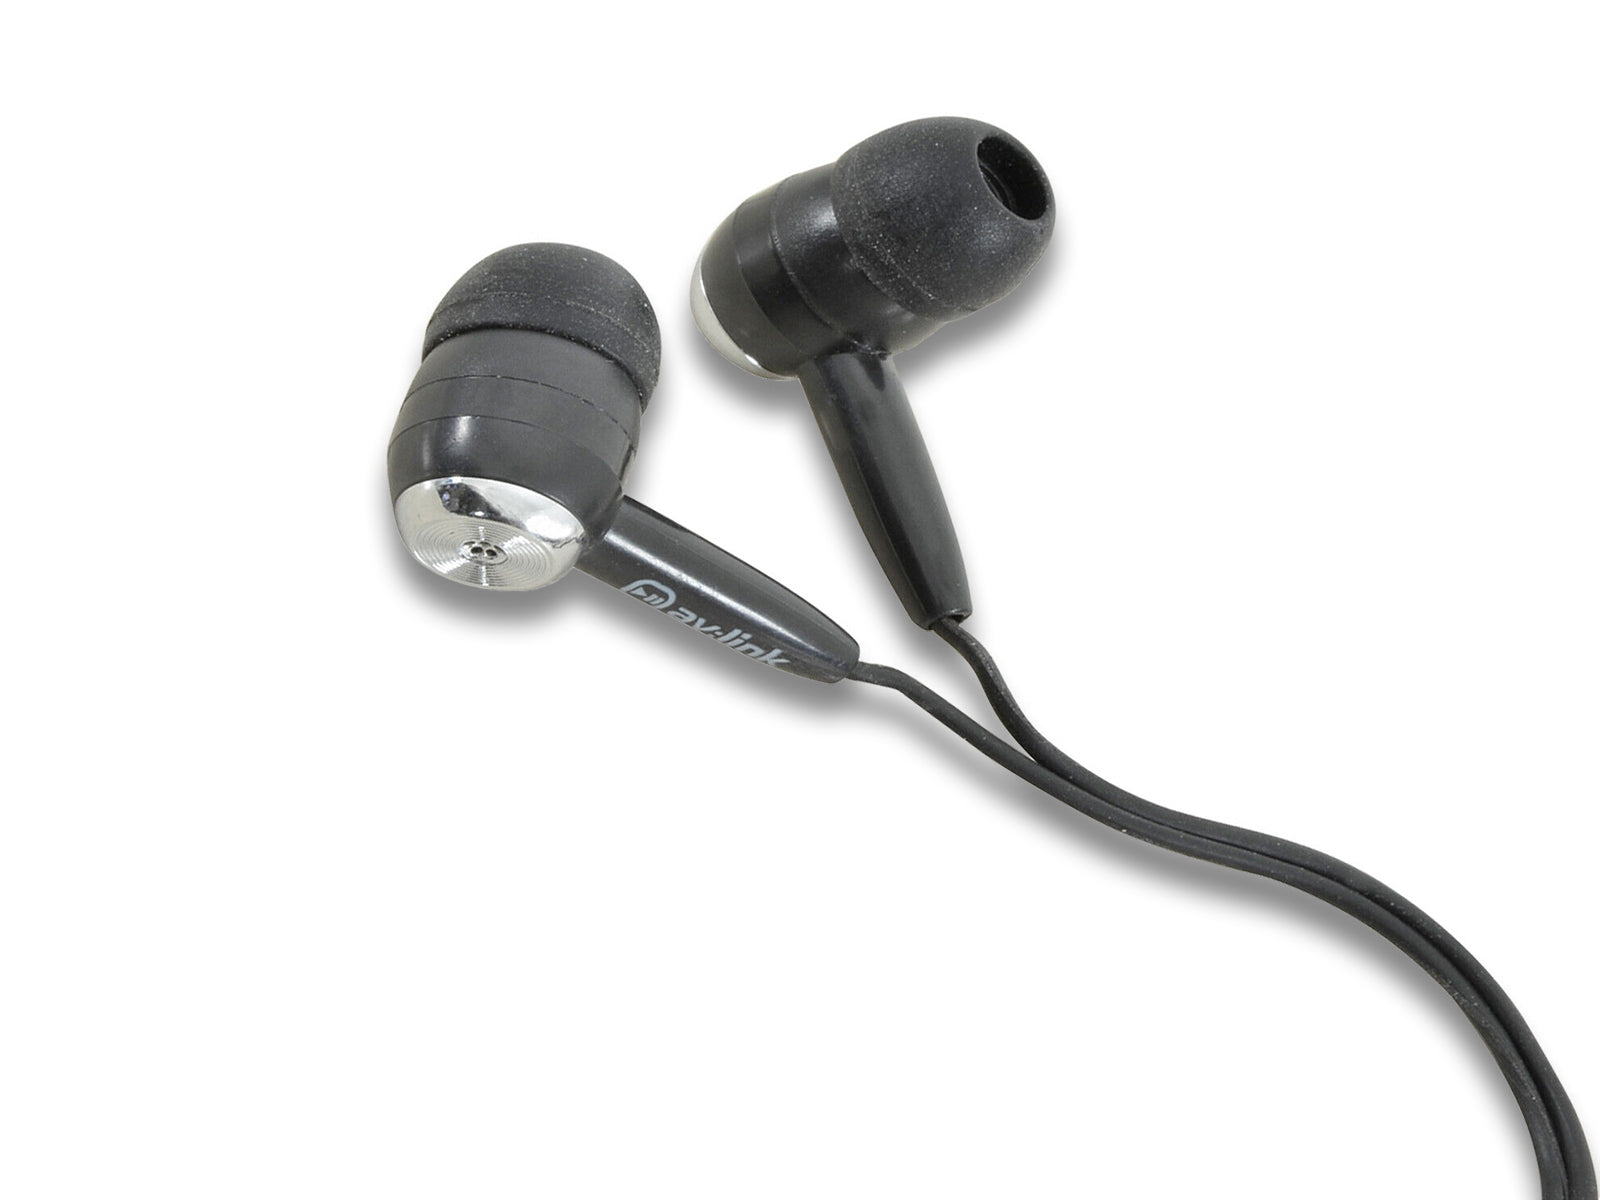 Ear Buds With 3.5mm Stereo Jack Close up View